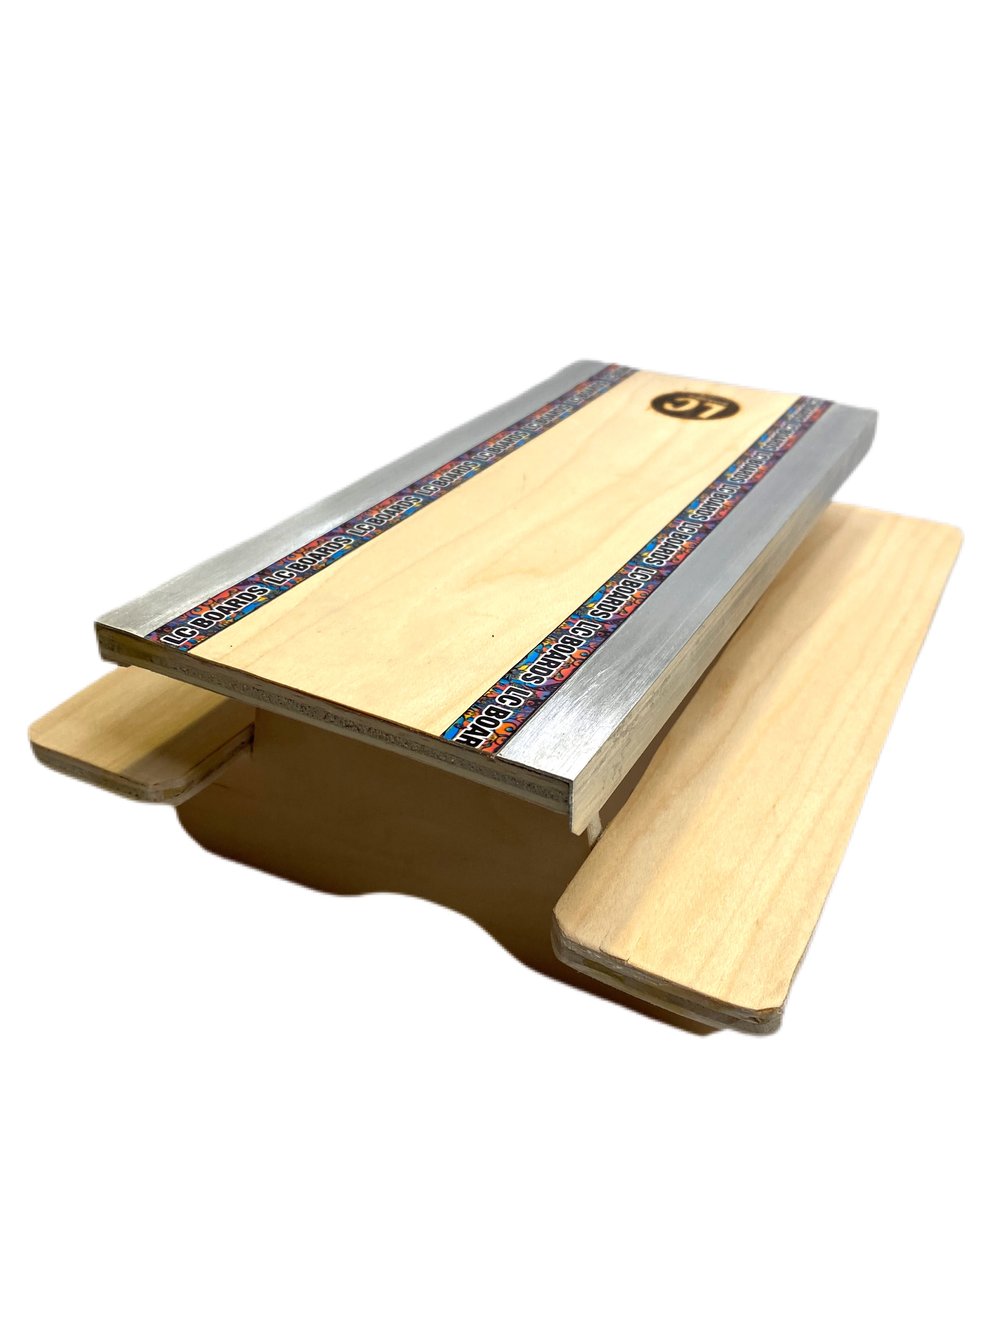 LC BOARDS Fingerboard Picnic Table Ramp